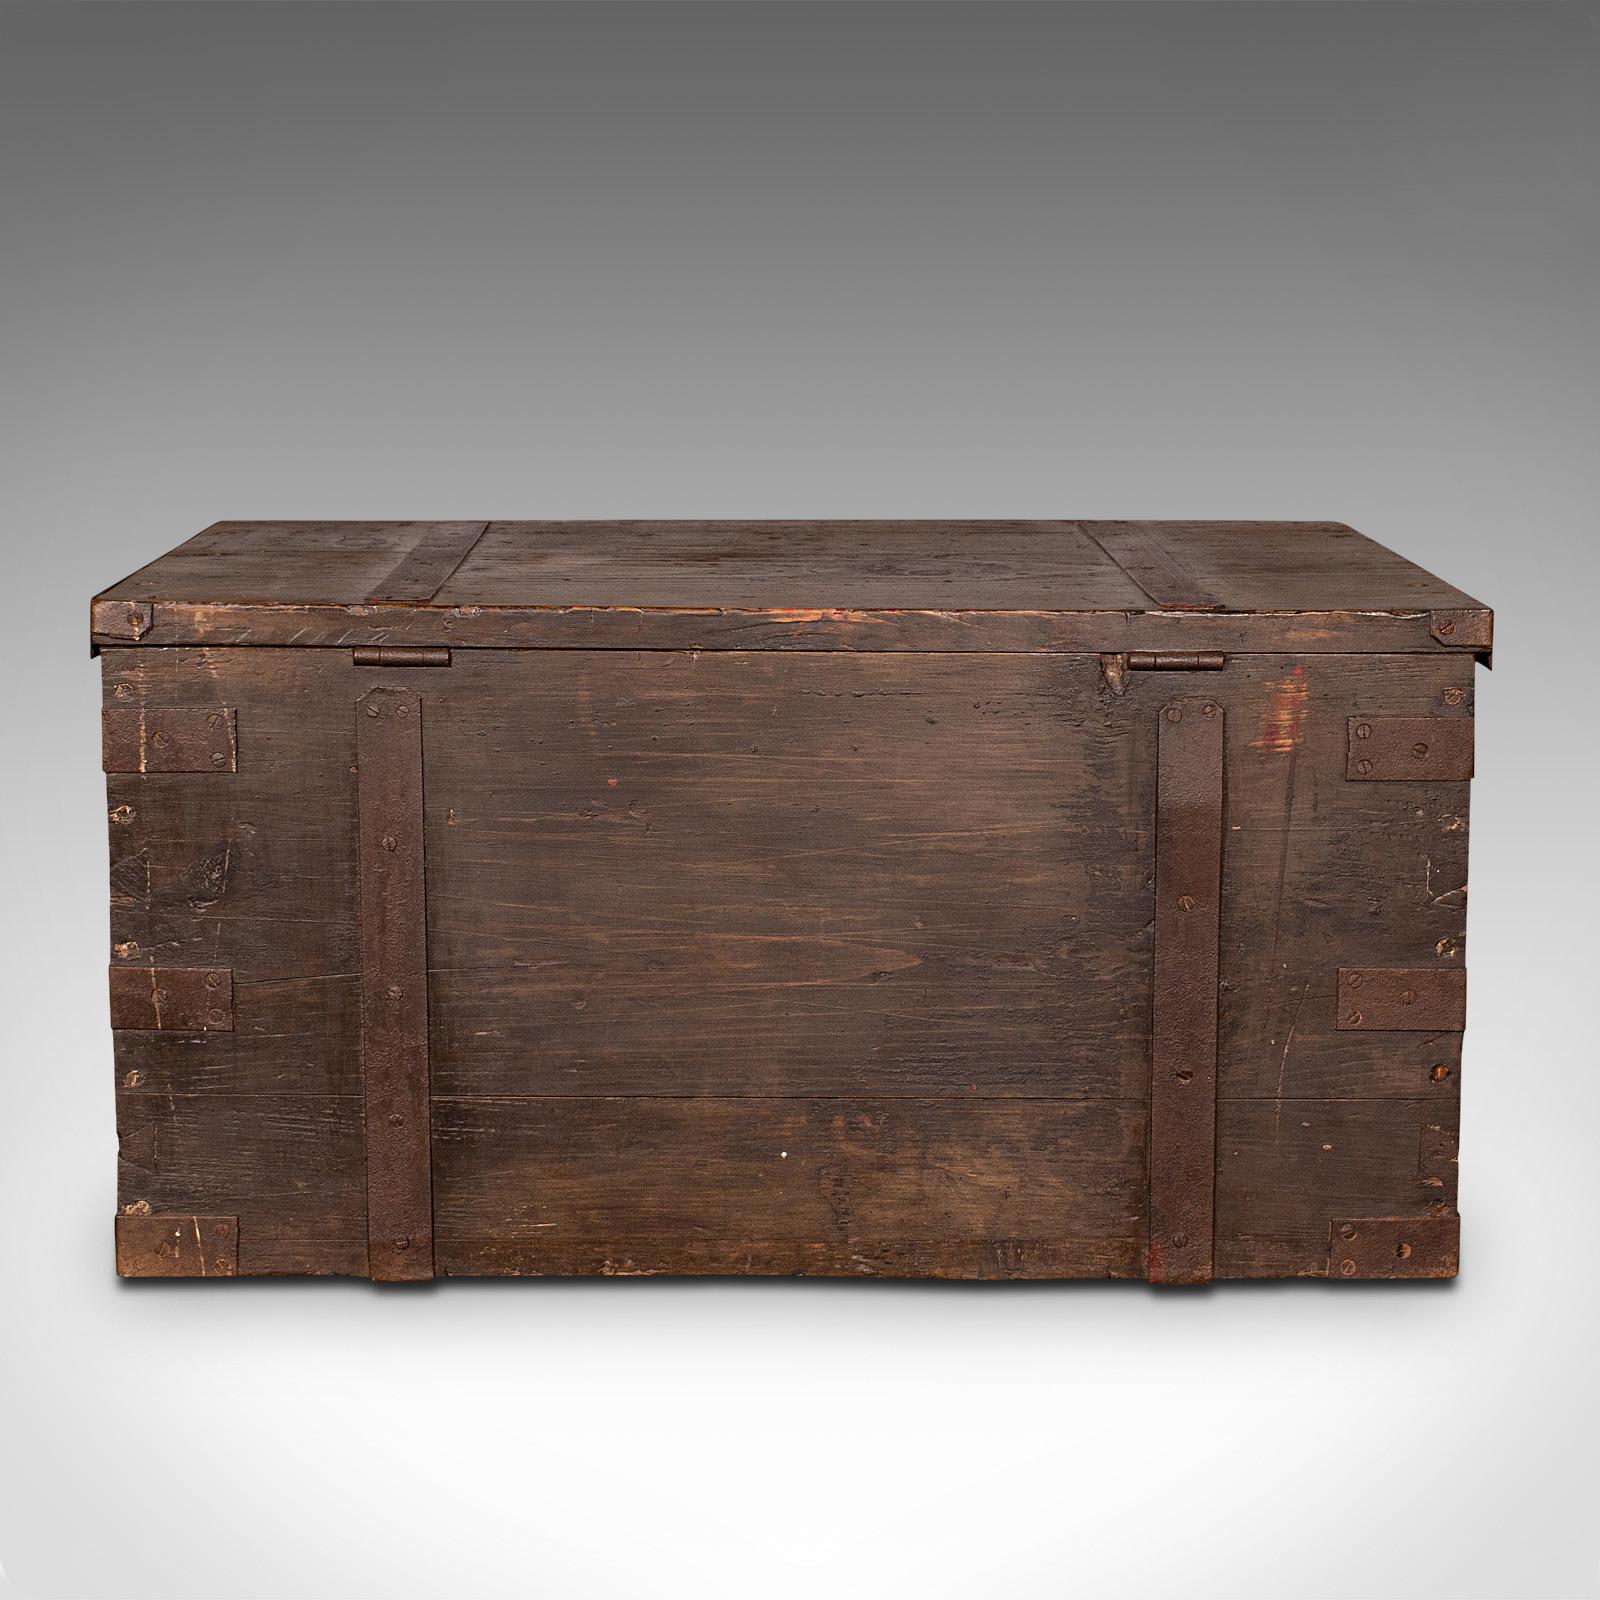 19th Century Antique Steamer Trunk, English, Pine, Iron, Carriage Chest, Victorian, C.1860